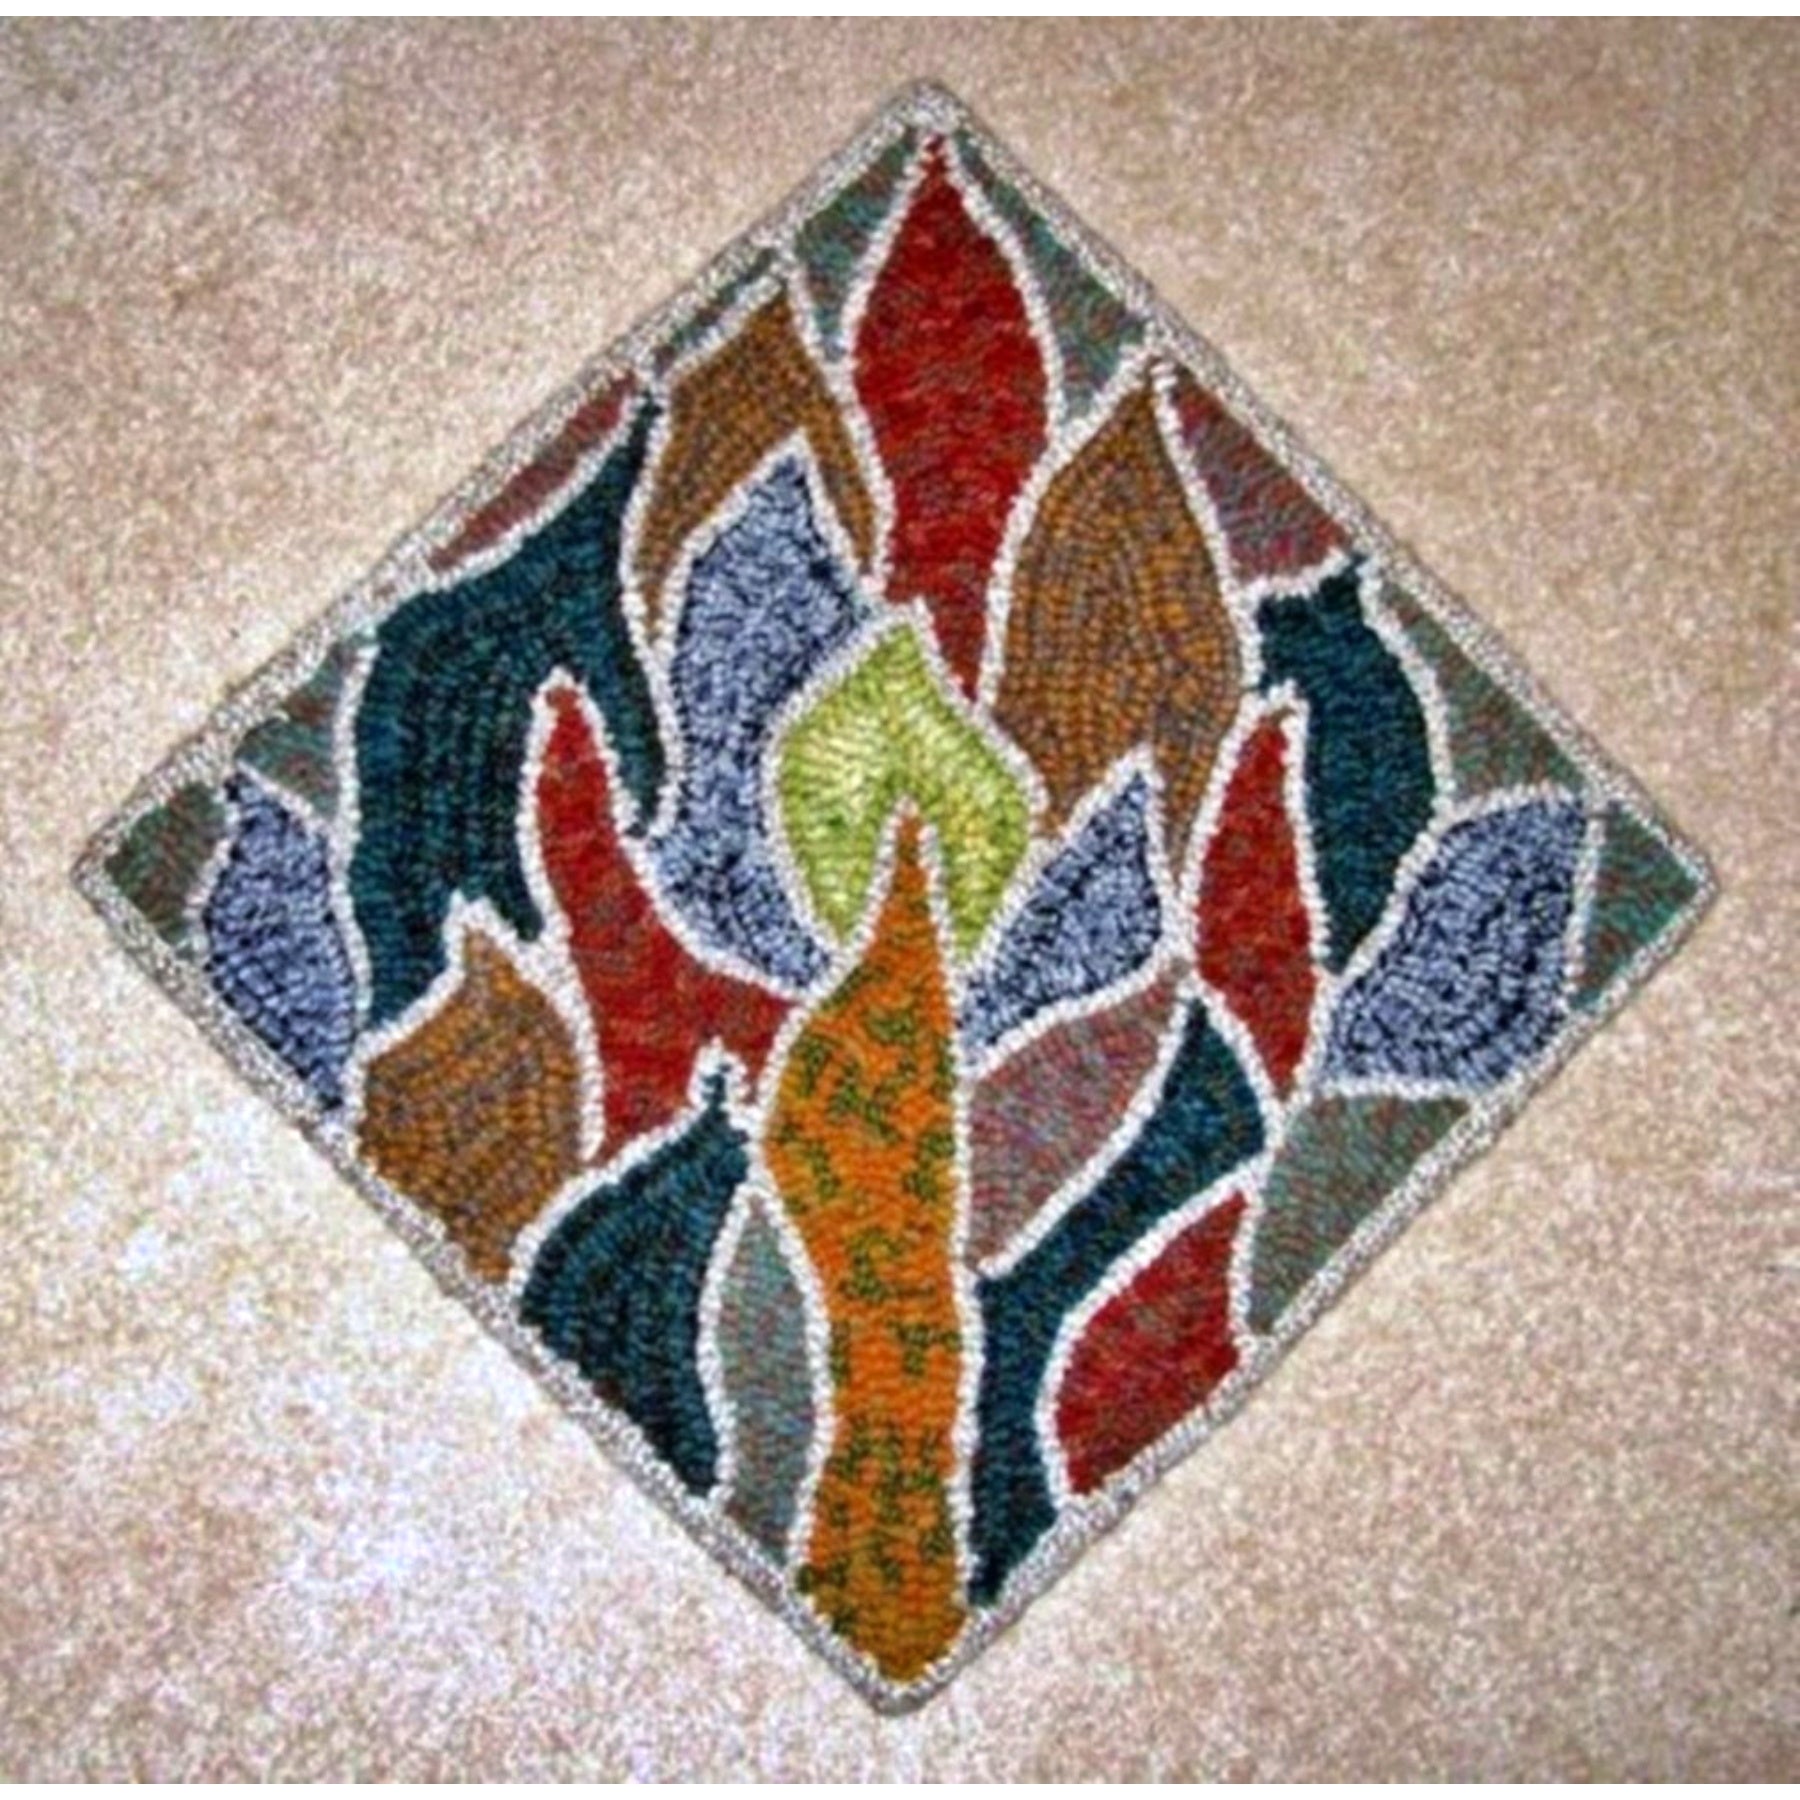 Flaming Textures, rug hooked by Karen Maddox